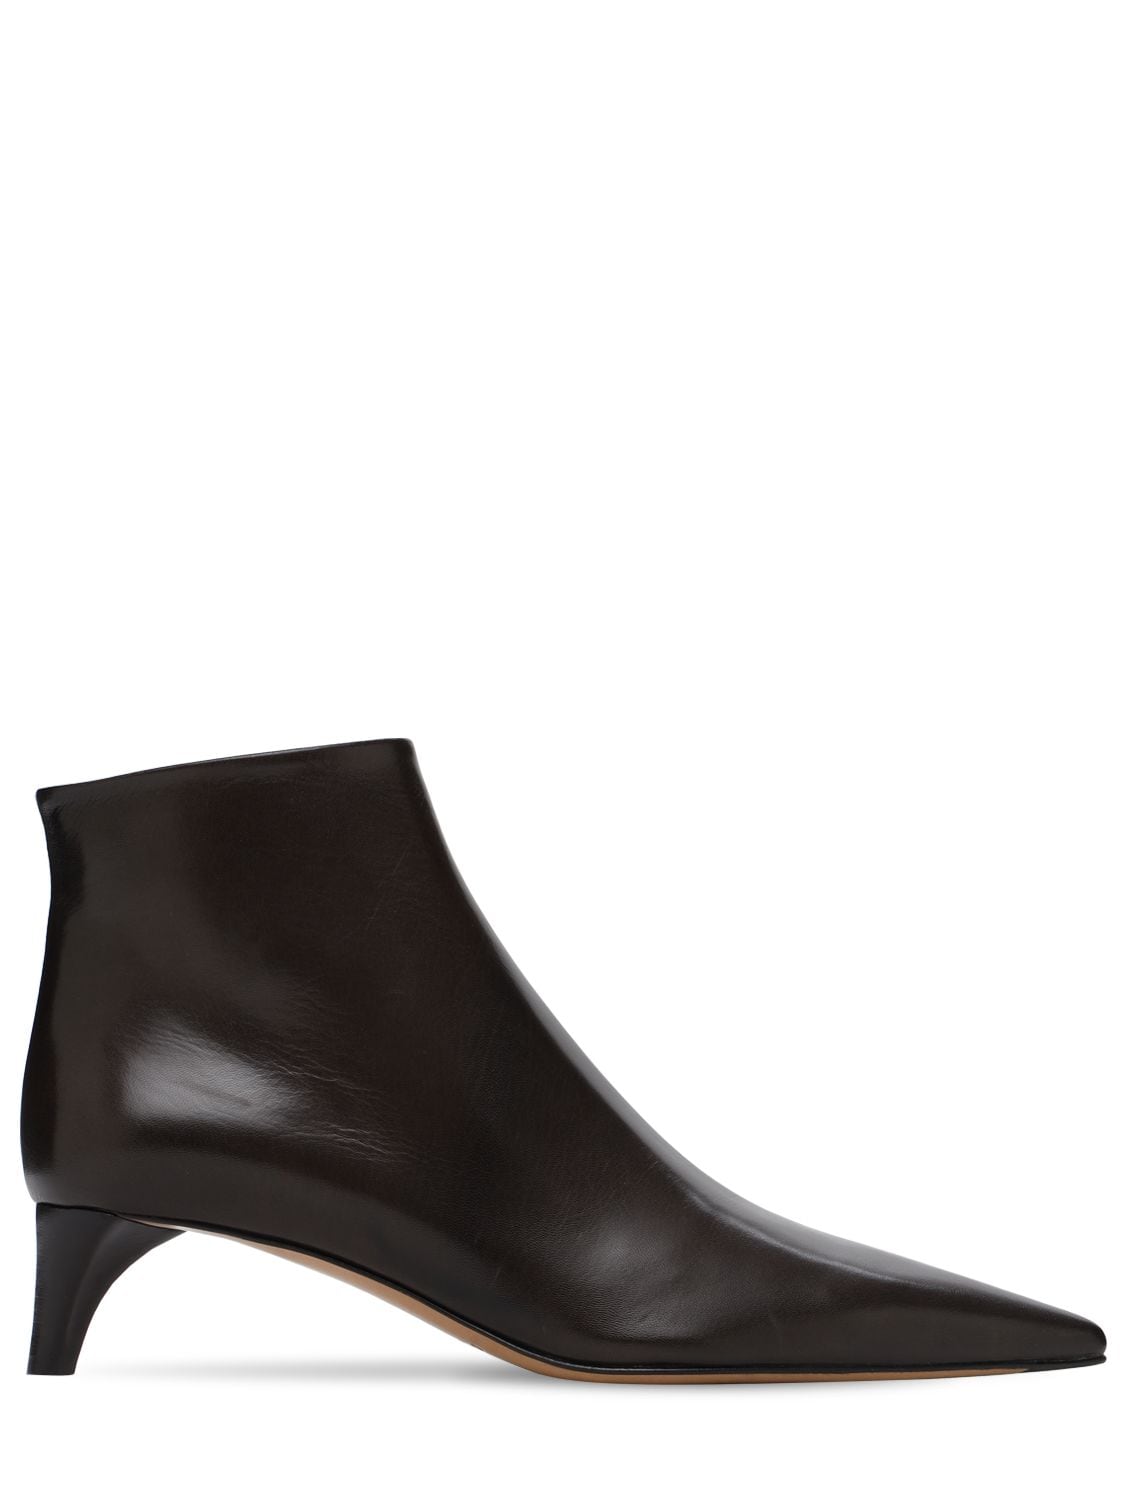 Buy 45mm Leather Ankle Boots for Womens 